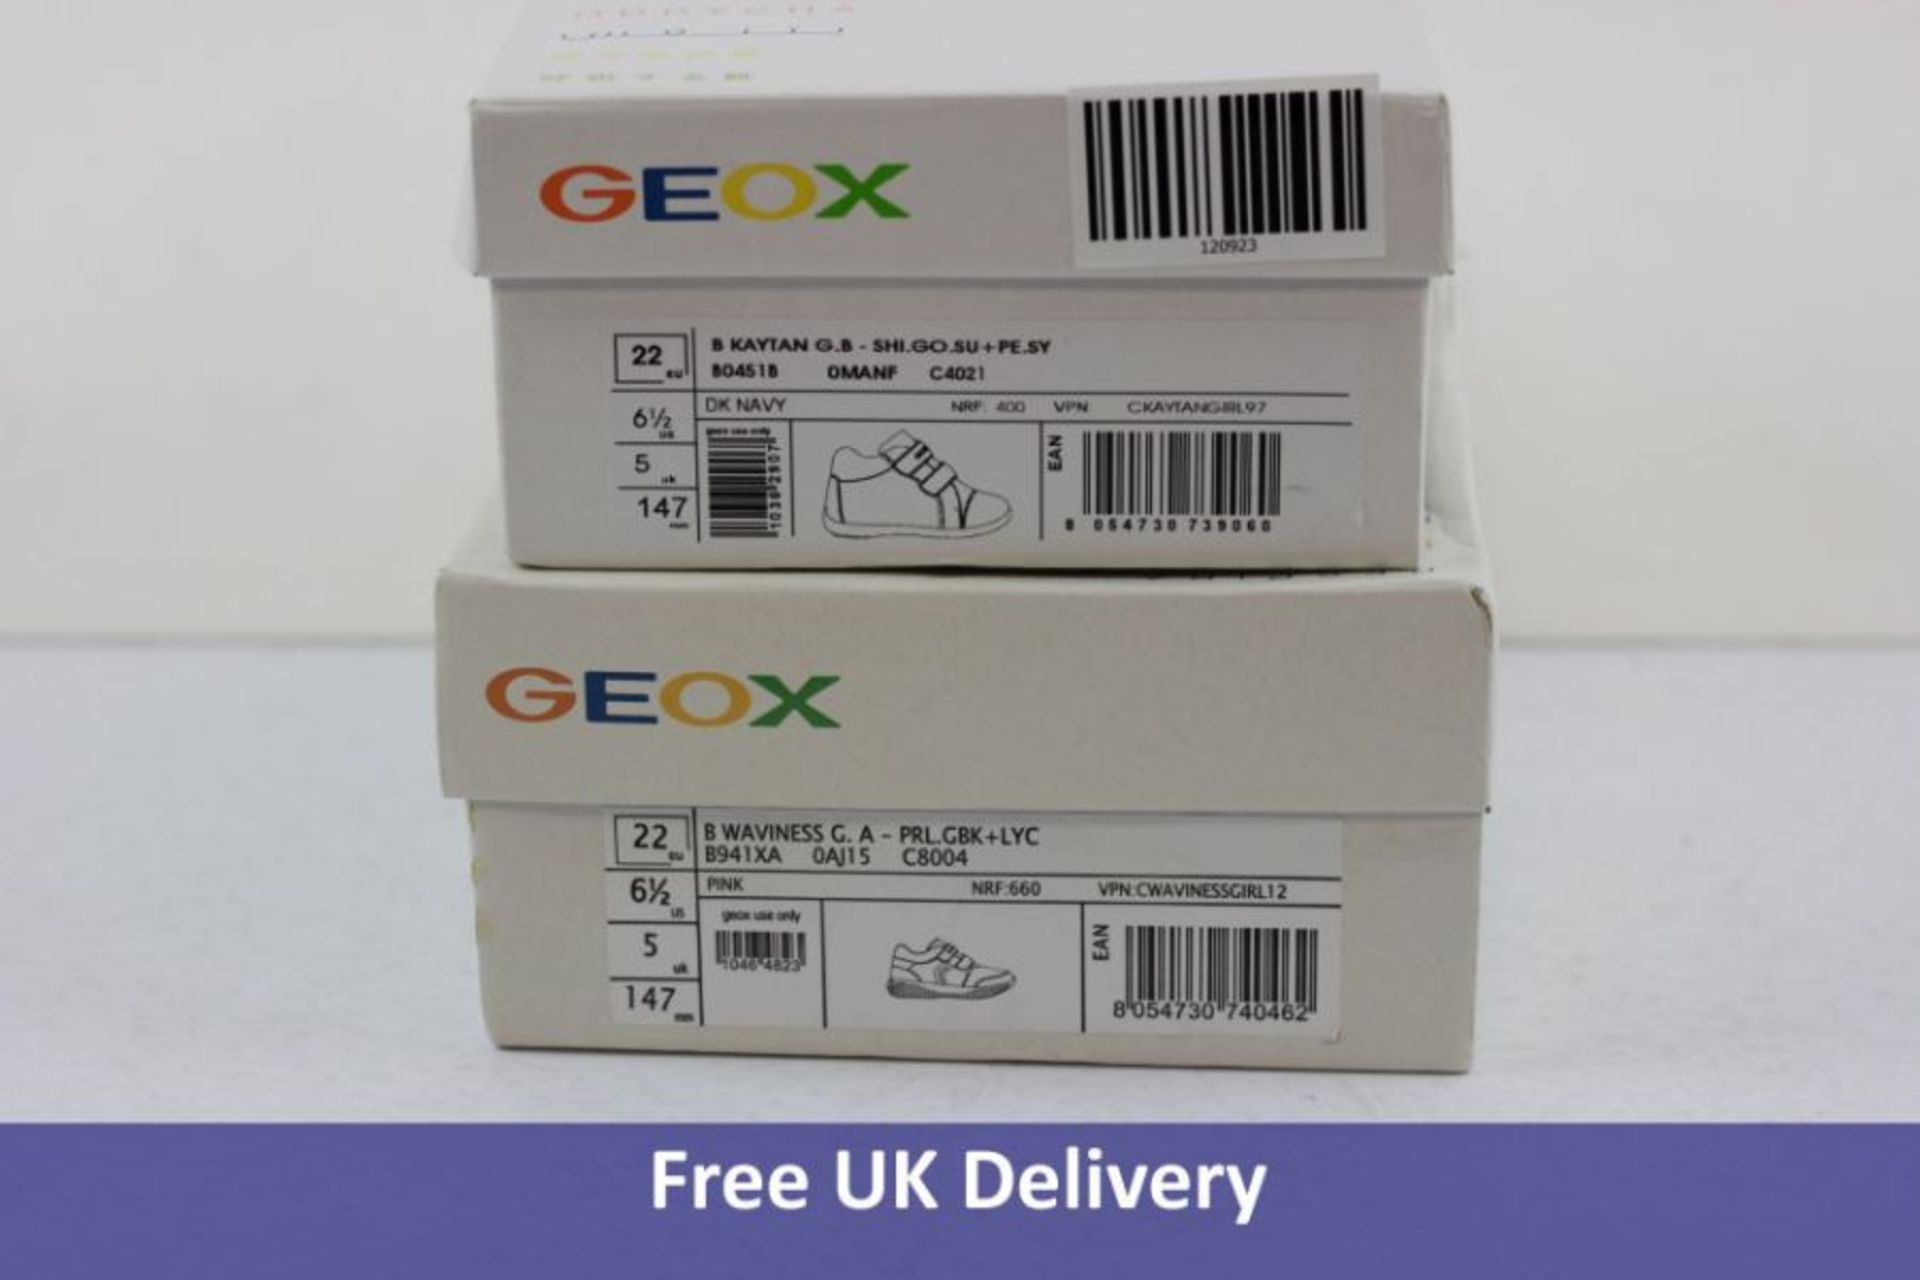 Two Pairs of Geox Children's Trainers to Include 1x B Kaytan Trainer Boots, Dark Navy, Infant Size 5